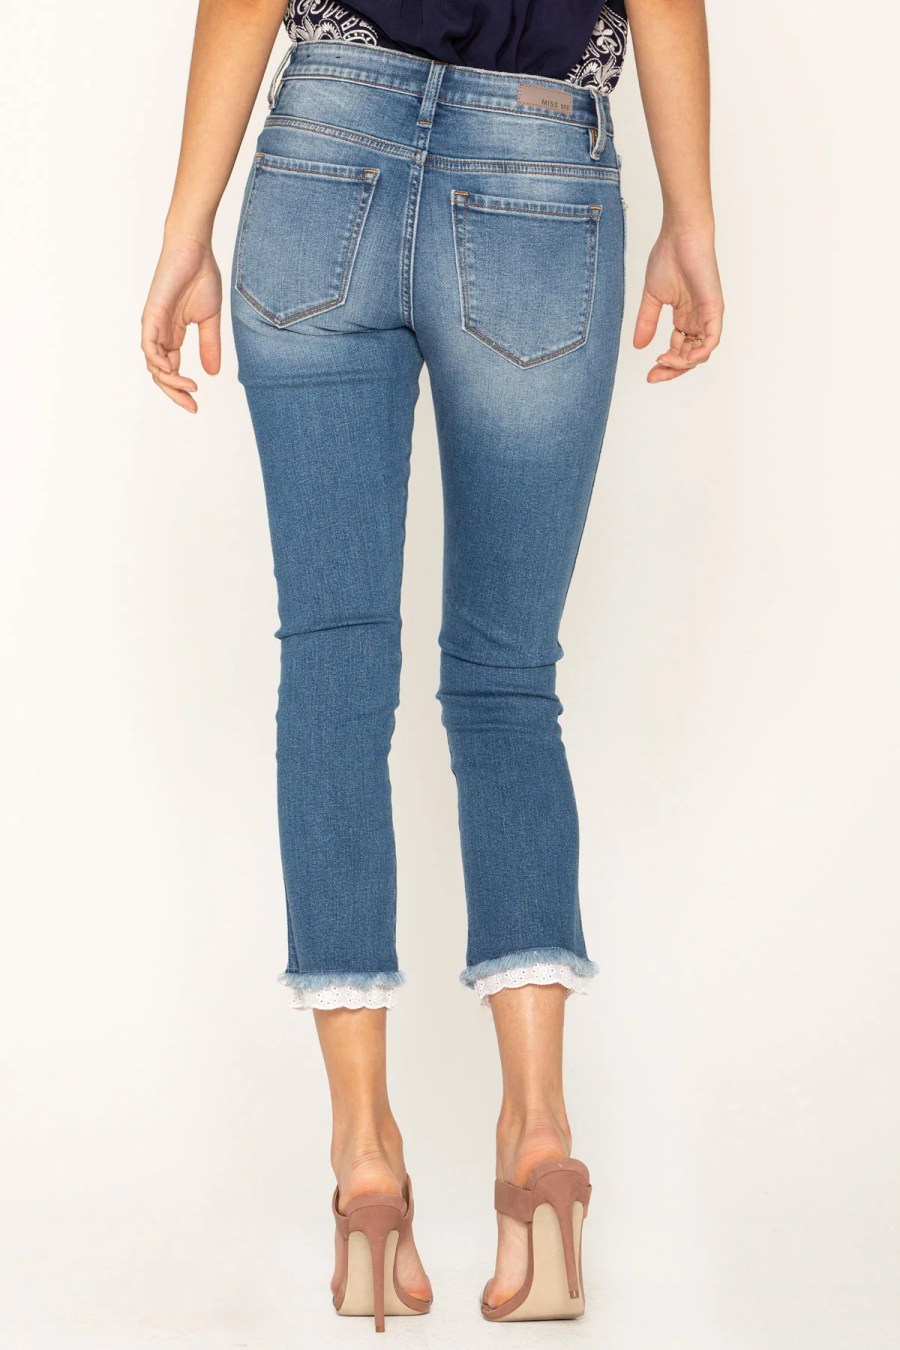 Make a statement with cropped denim jeans